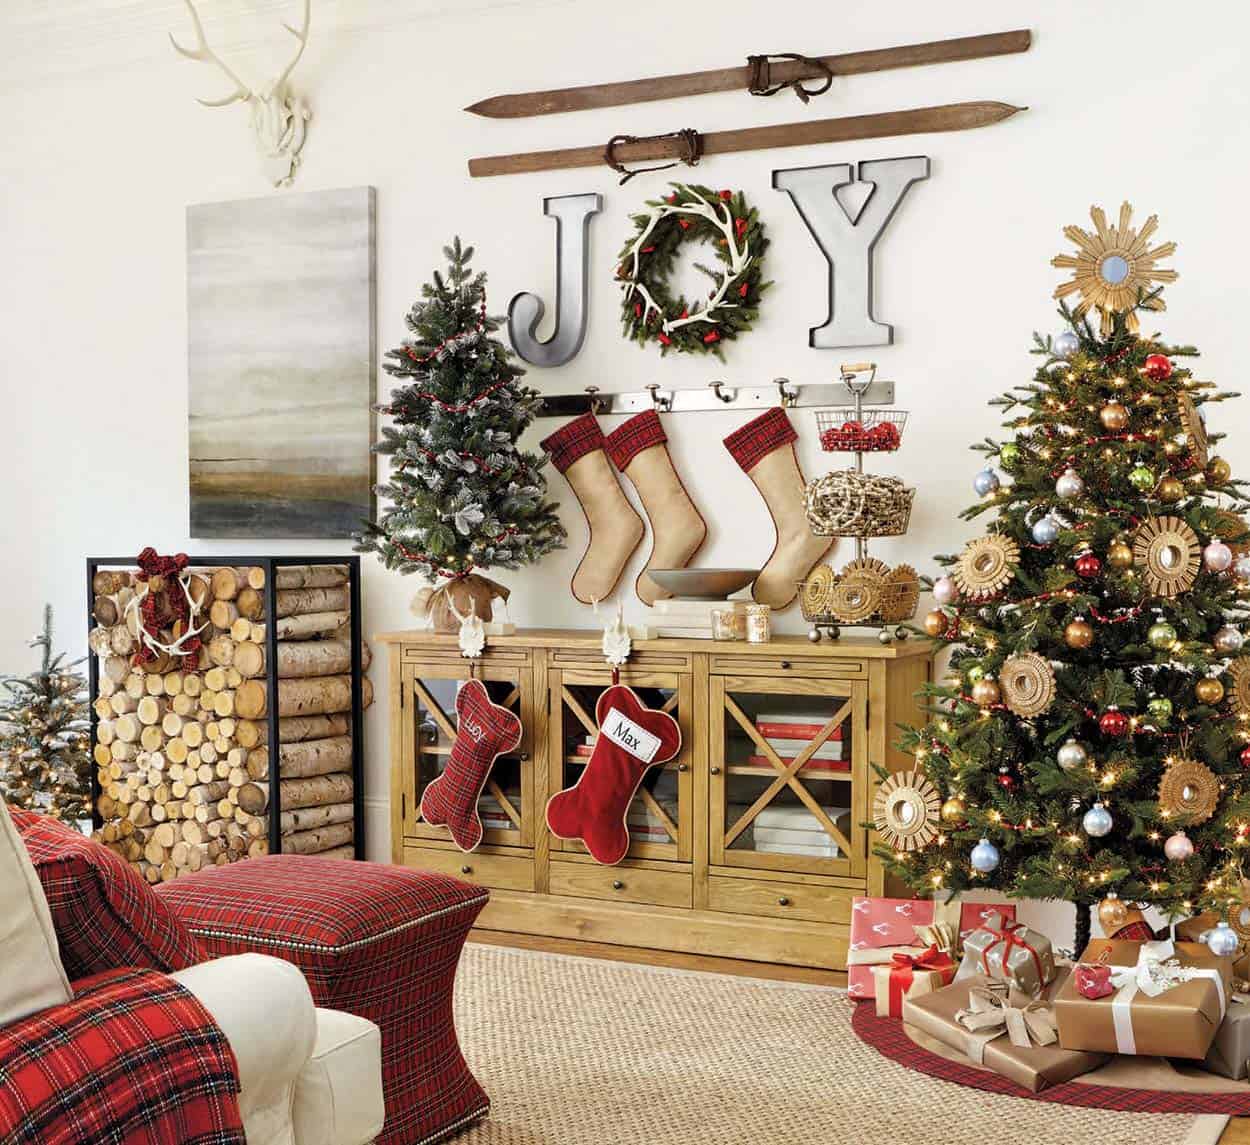 Rustic Country Theme. 3 Give Your Home a New Festive Christmas with +90 Themes & Ideas - 10